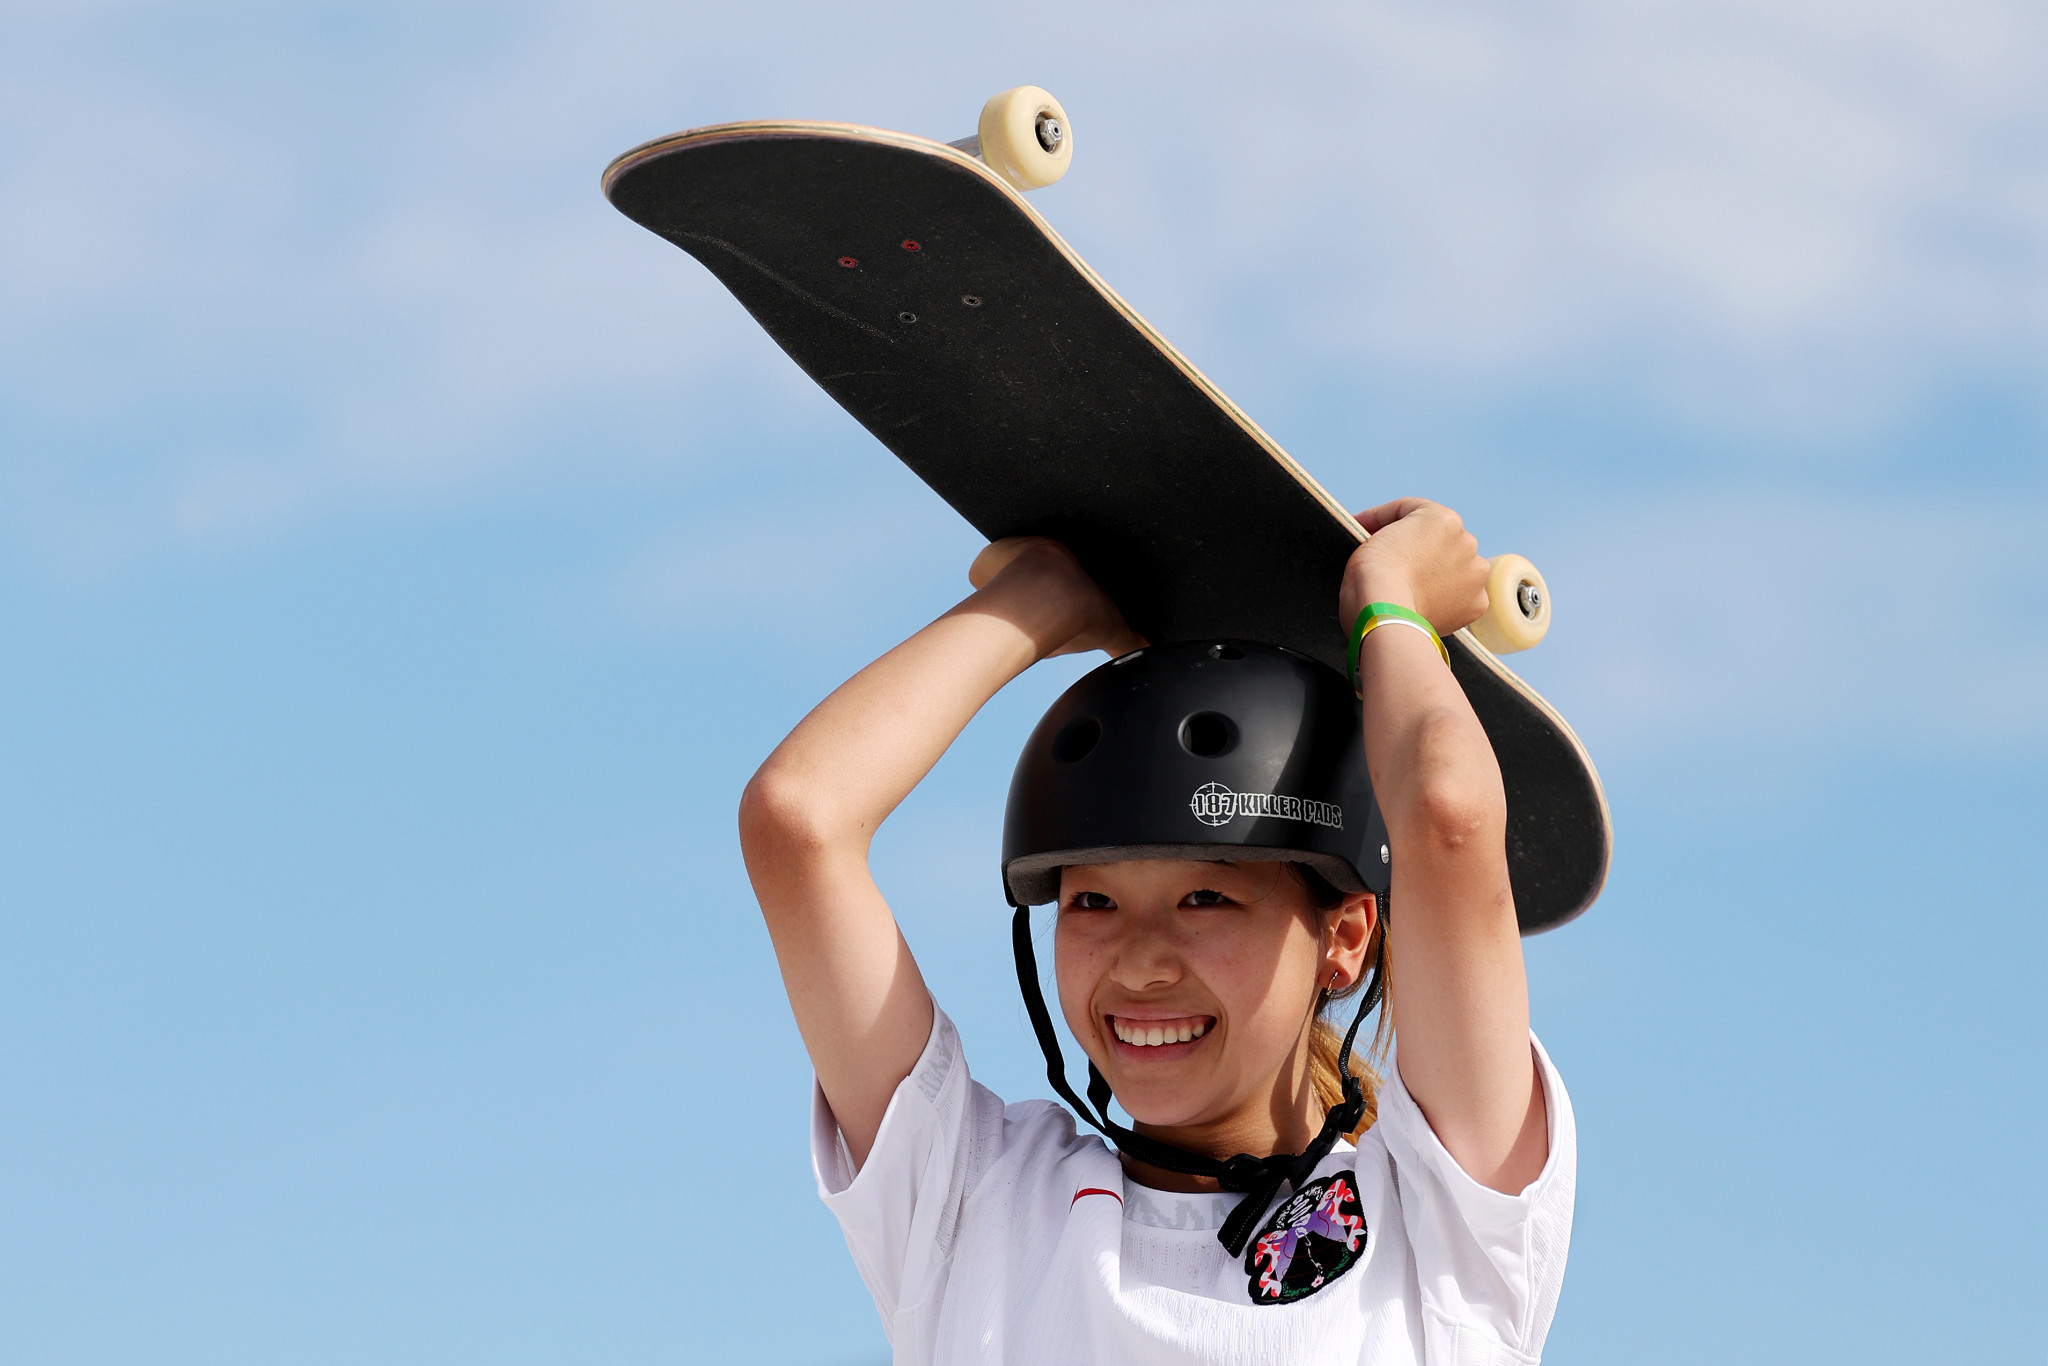 Coco Yoshizawa of Team Japan celebrates during the Women's Street Skateboarding Final at the Paris 2024 Olympic Games. GETTY IMAGES